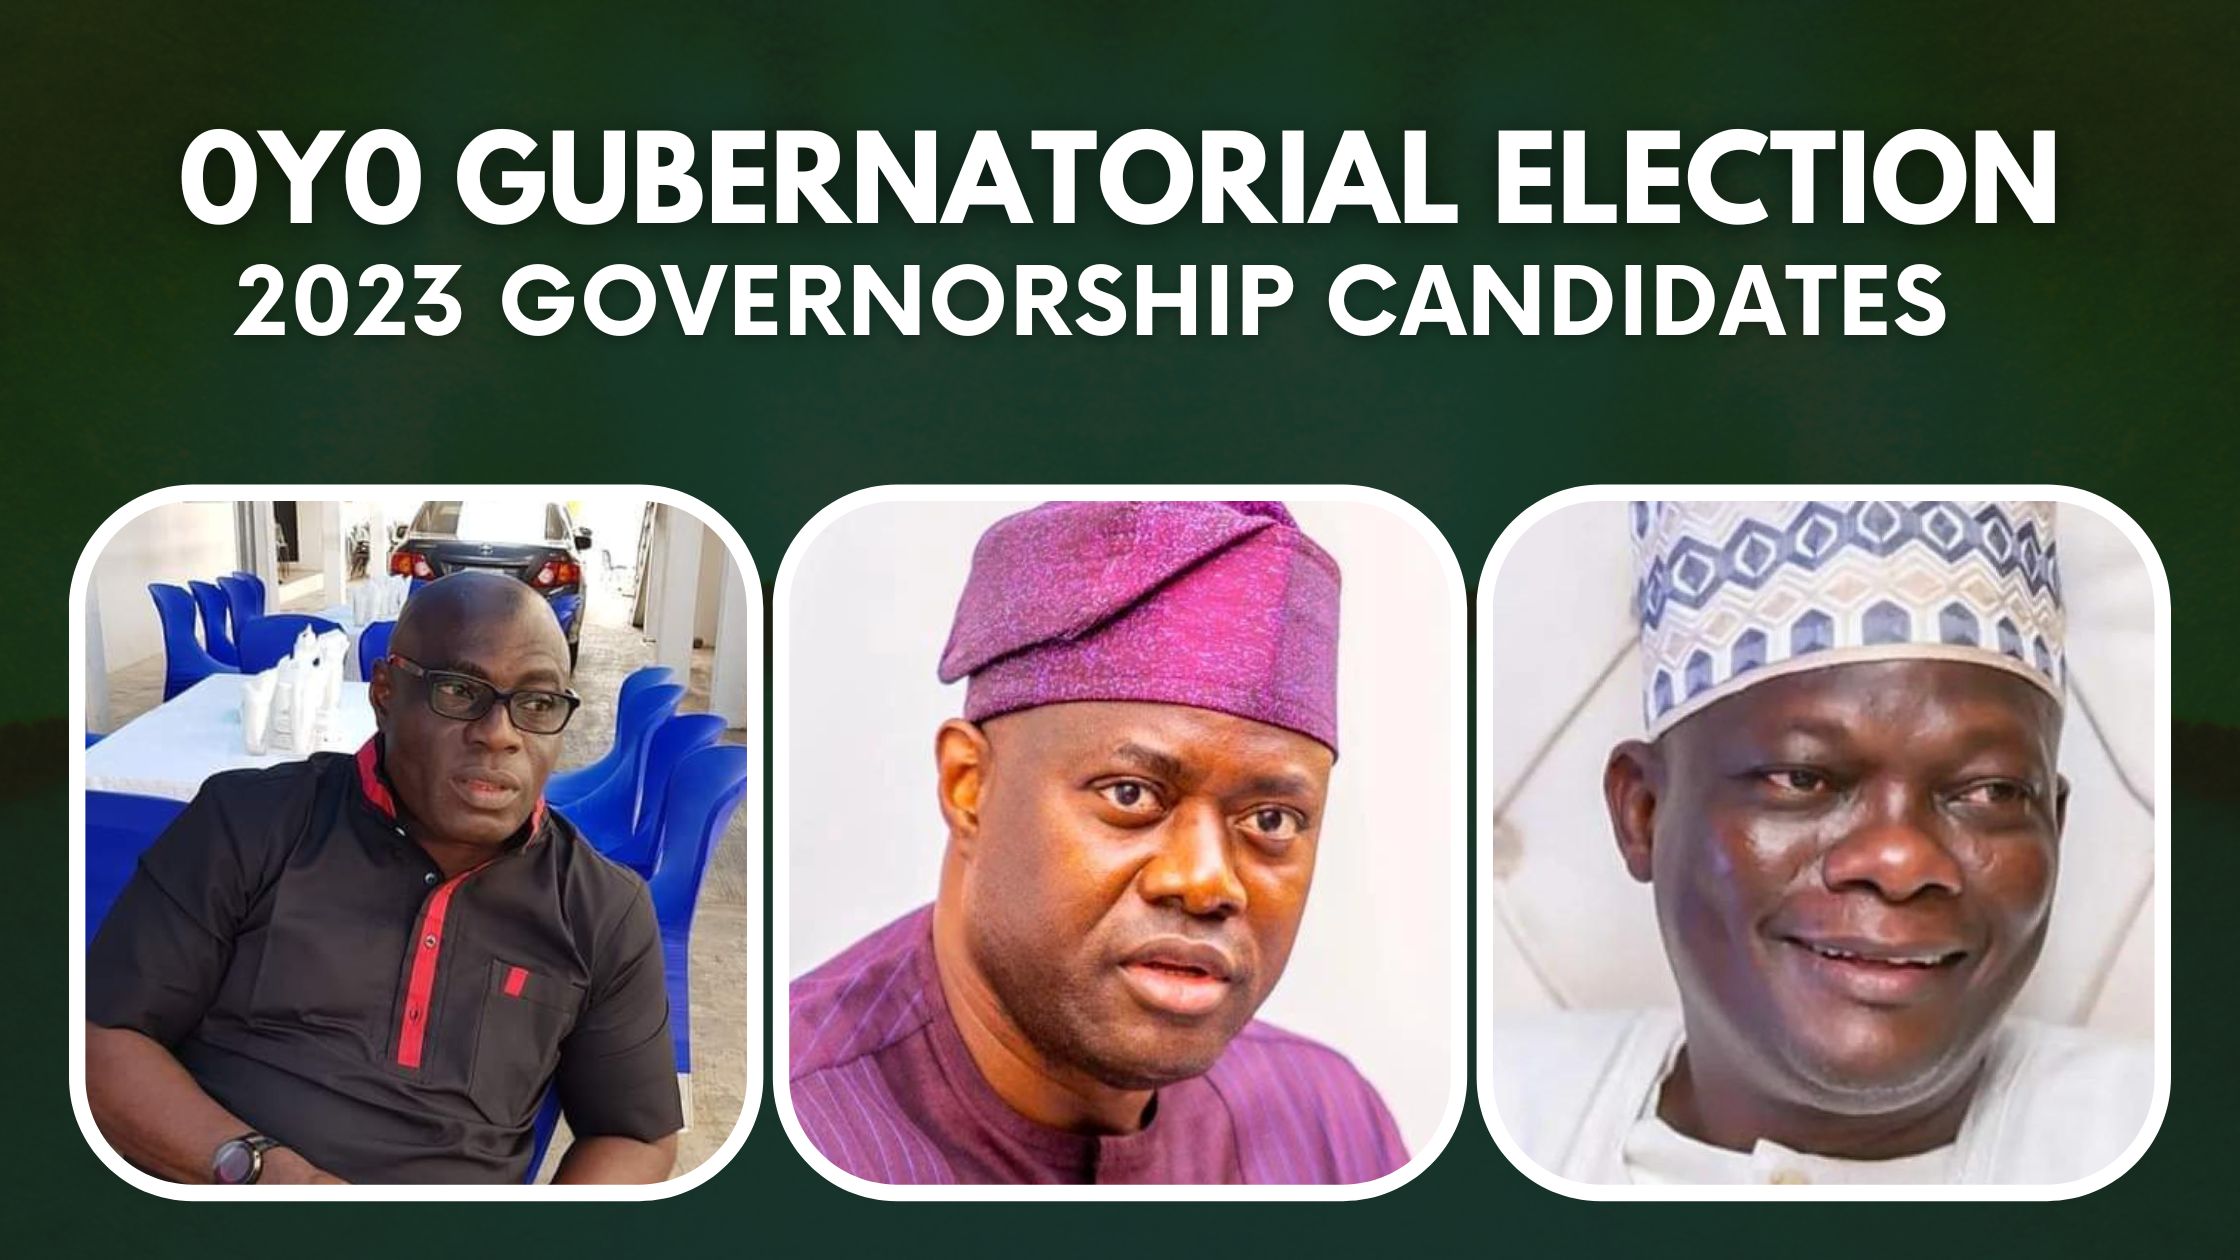 2023 Election: Top 3 Governorship Candidates in Oyo State